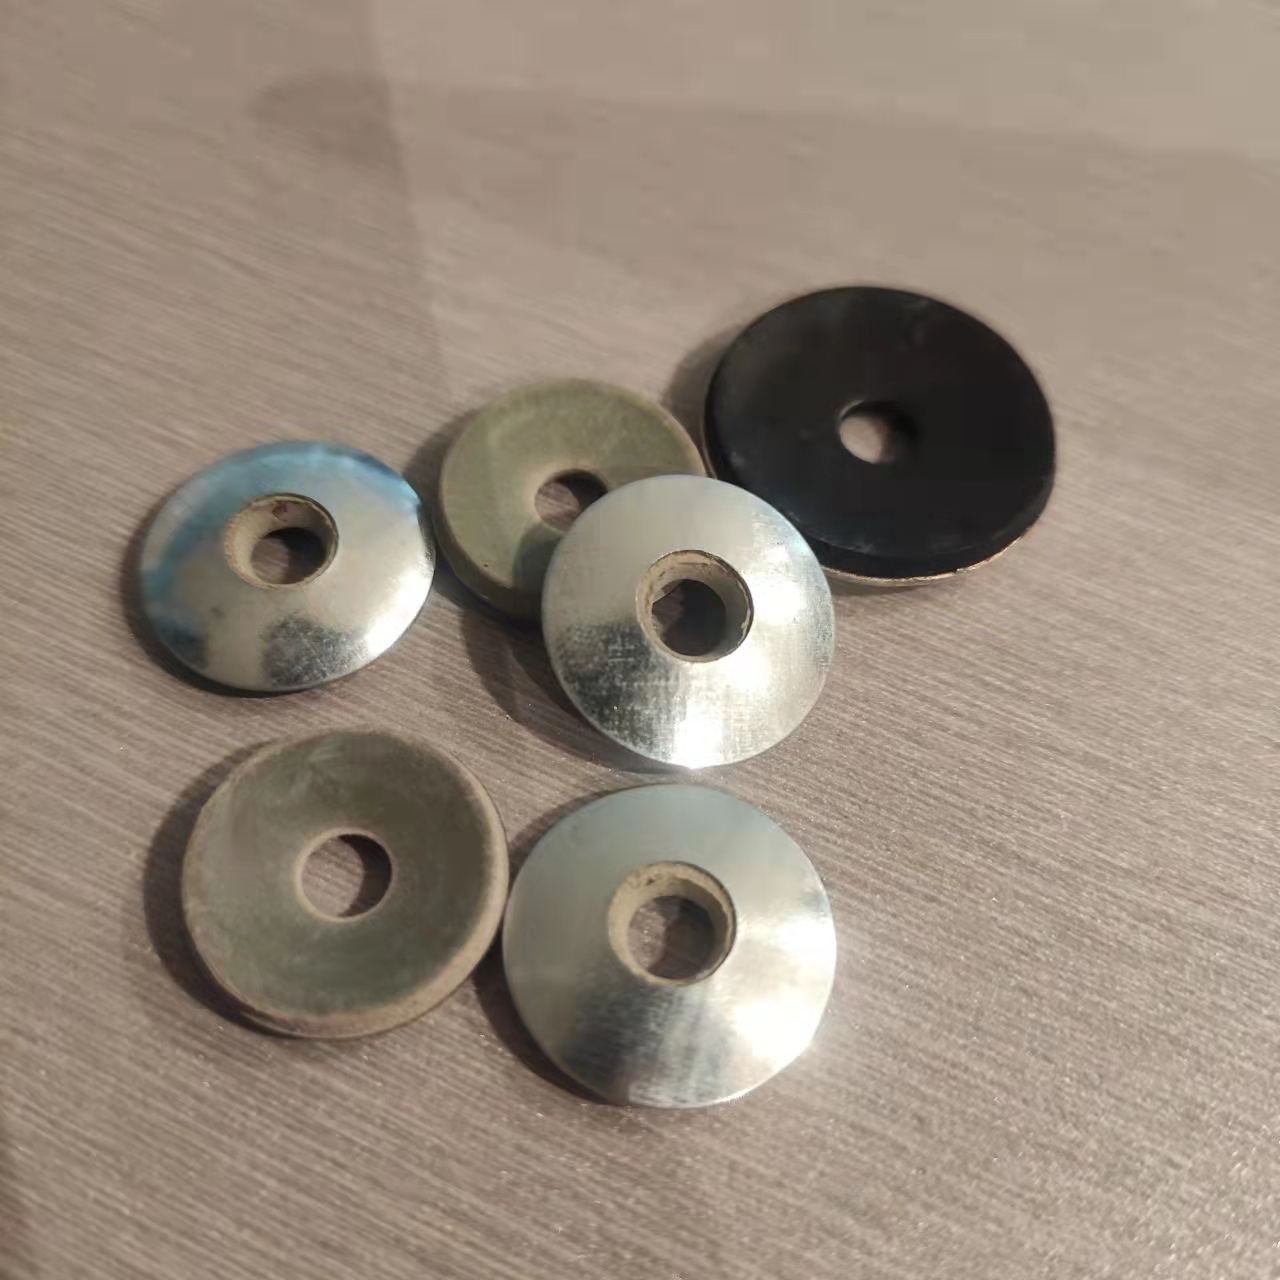 How to solve the aging of rubber washers?